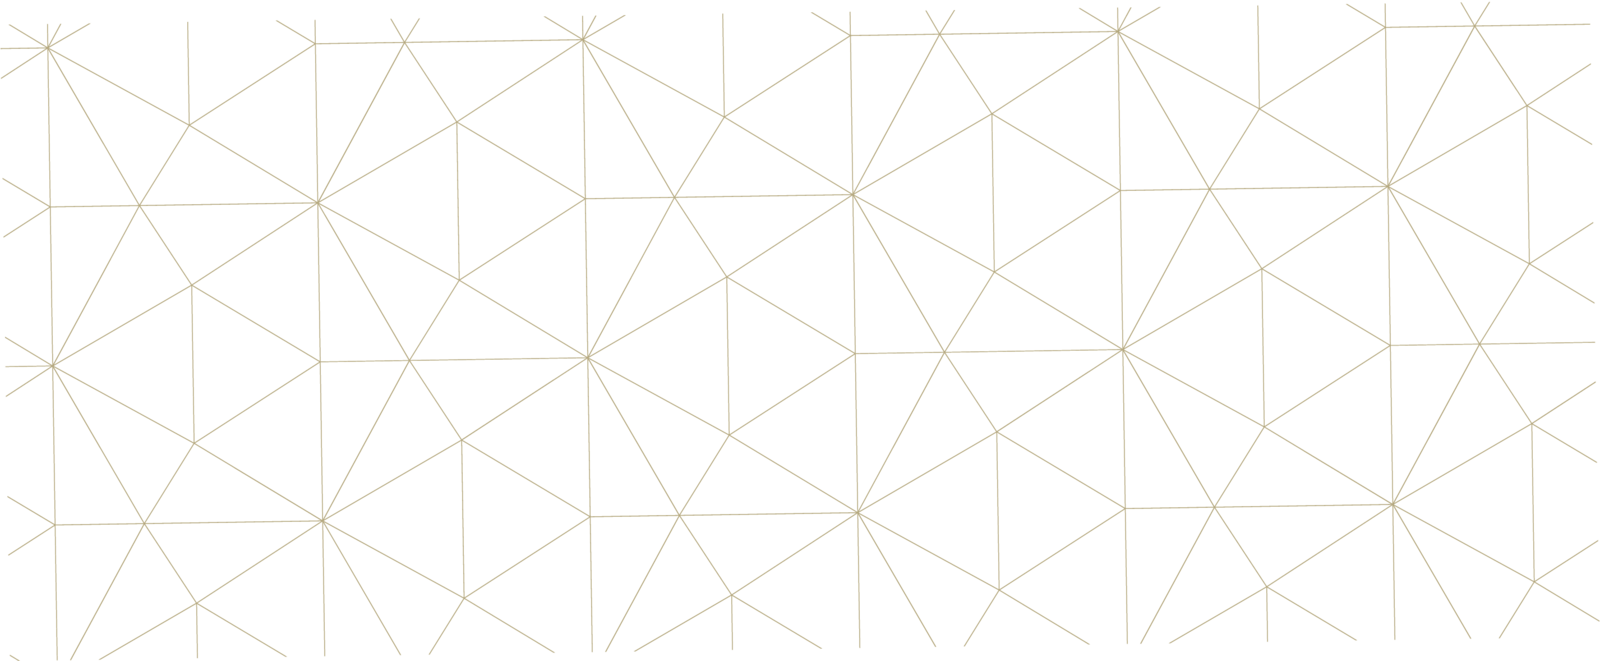 Background Image with Geometric Lines